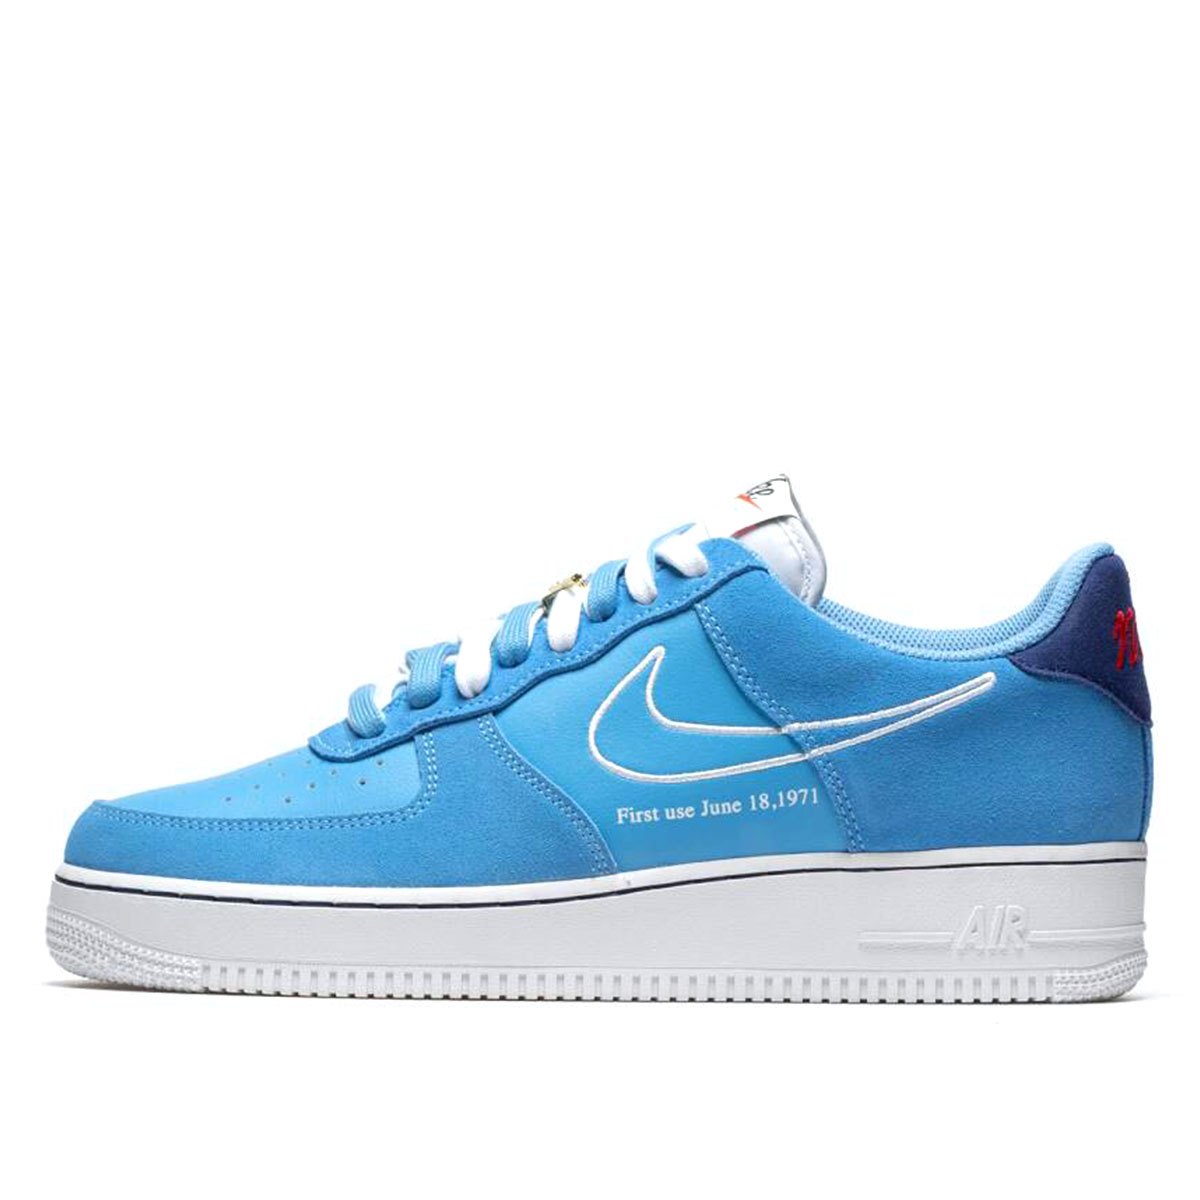 Nike Air Force 1 Low First Use University Blue Men's - DB3597-400 - US